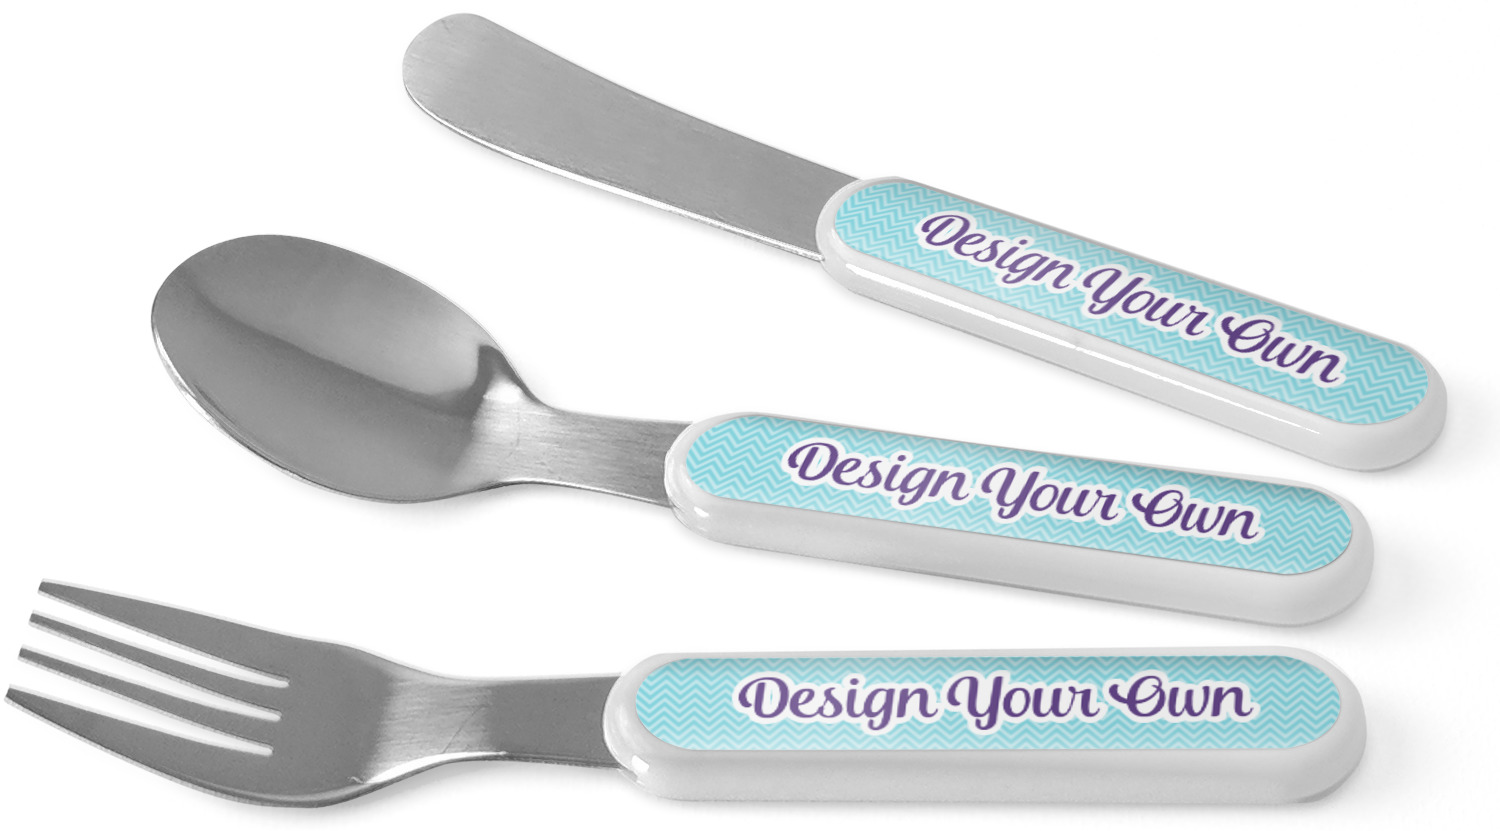 https://www.youcustomizeit.com/common/MAKE/965833/Design-Your-Own-Kids-Cutlery-3.jpg?lm=1562955651